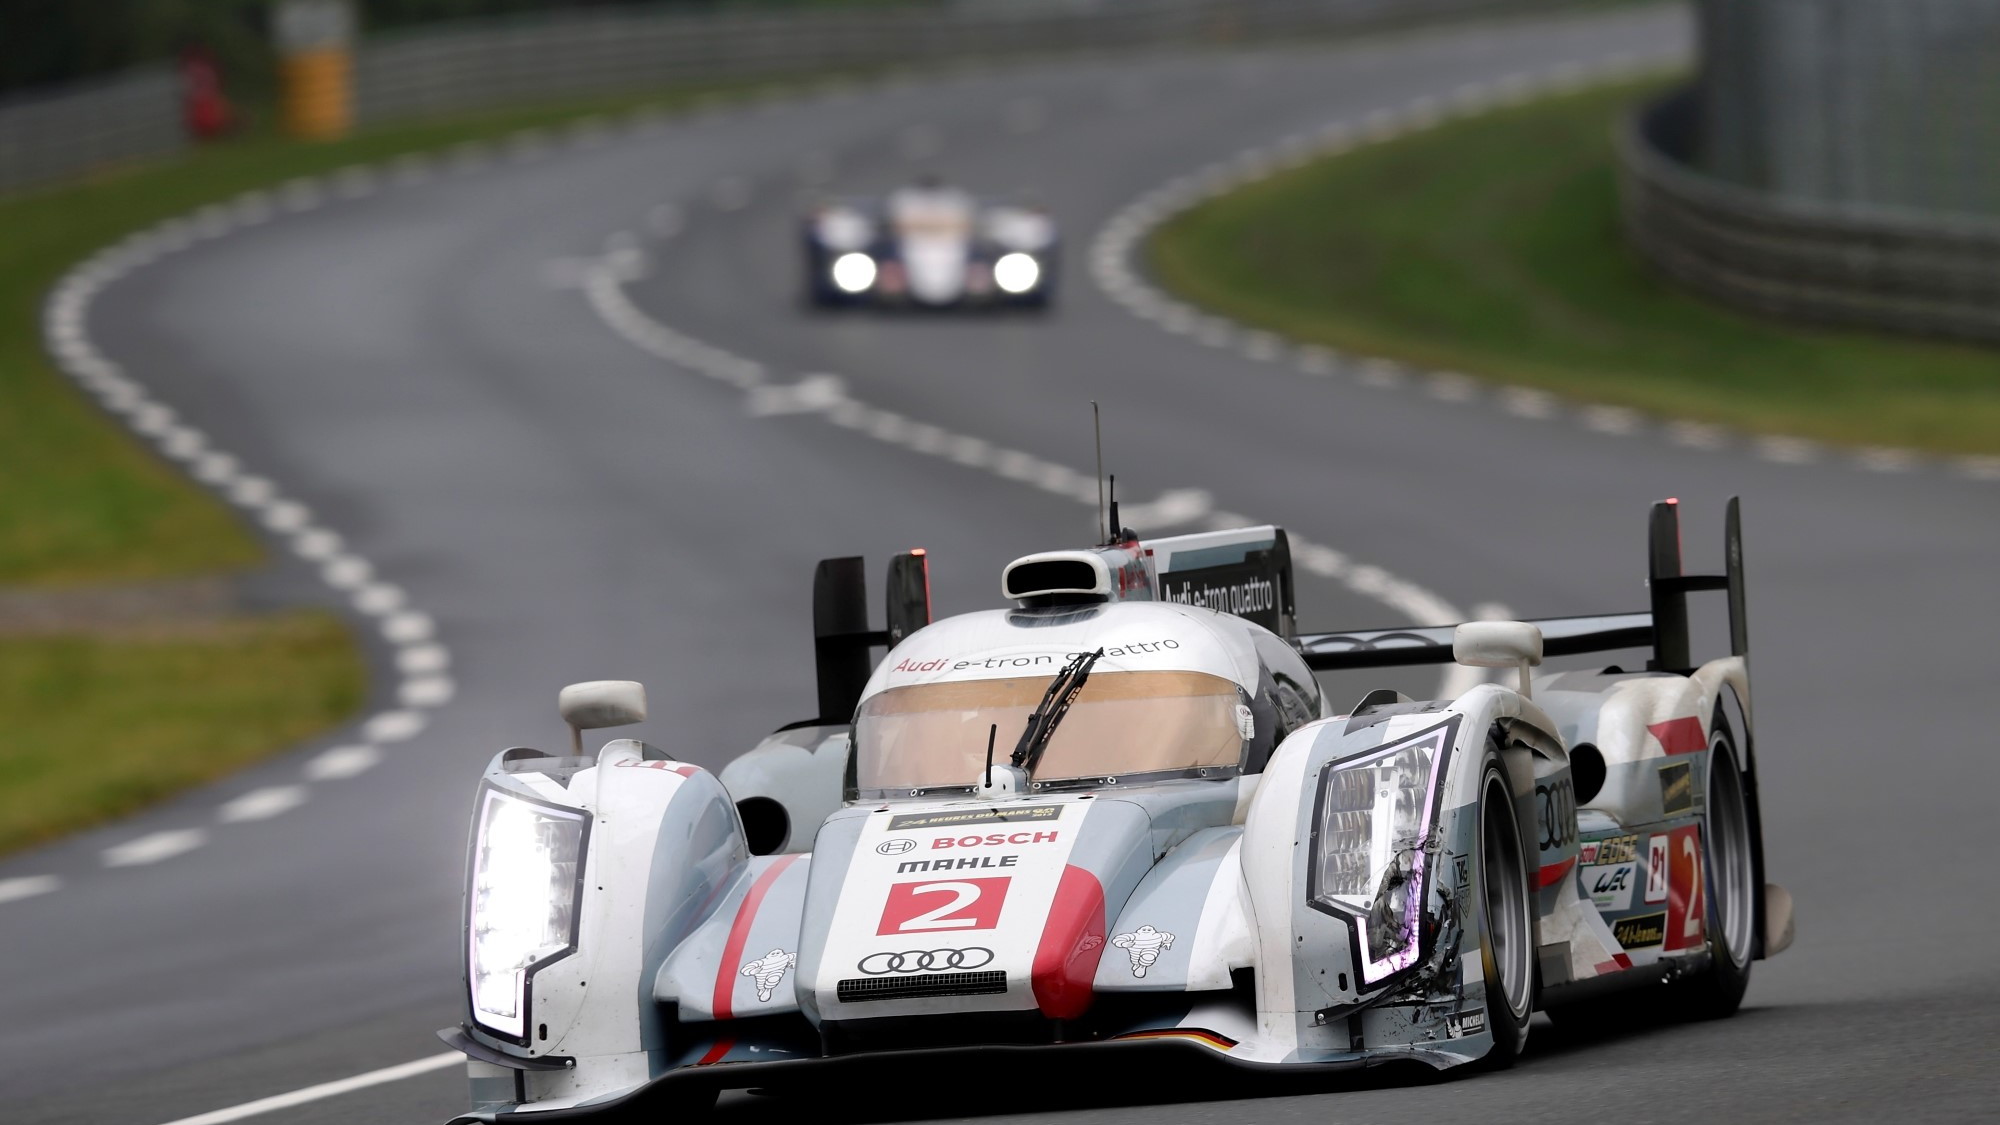 Allan McNish and the Audi team prepare for the 2013 24 Hours of Le Mans